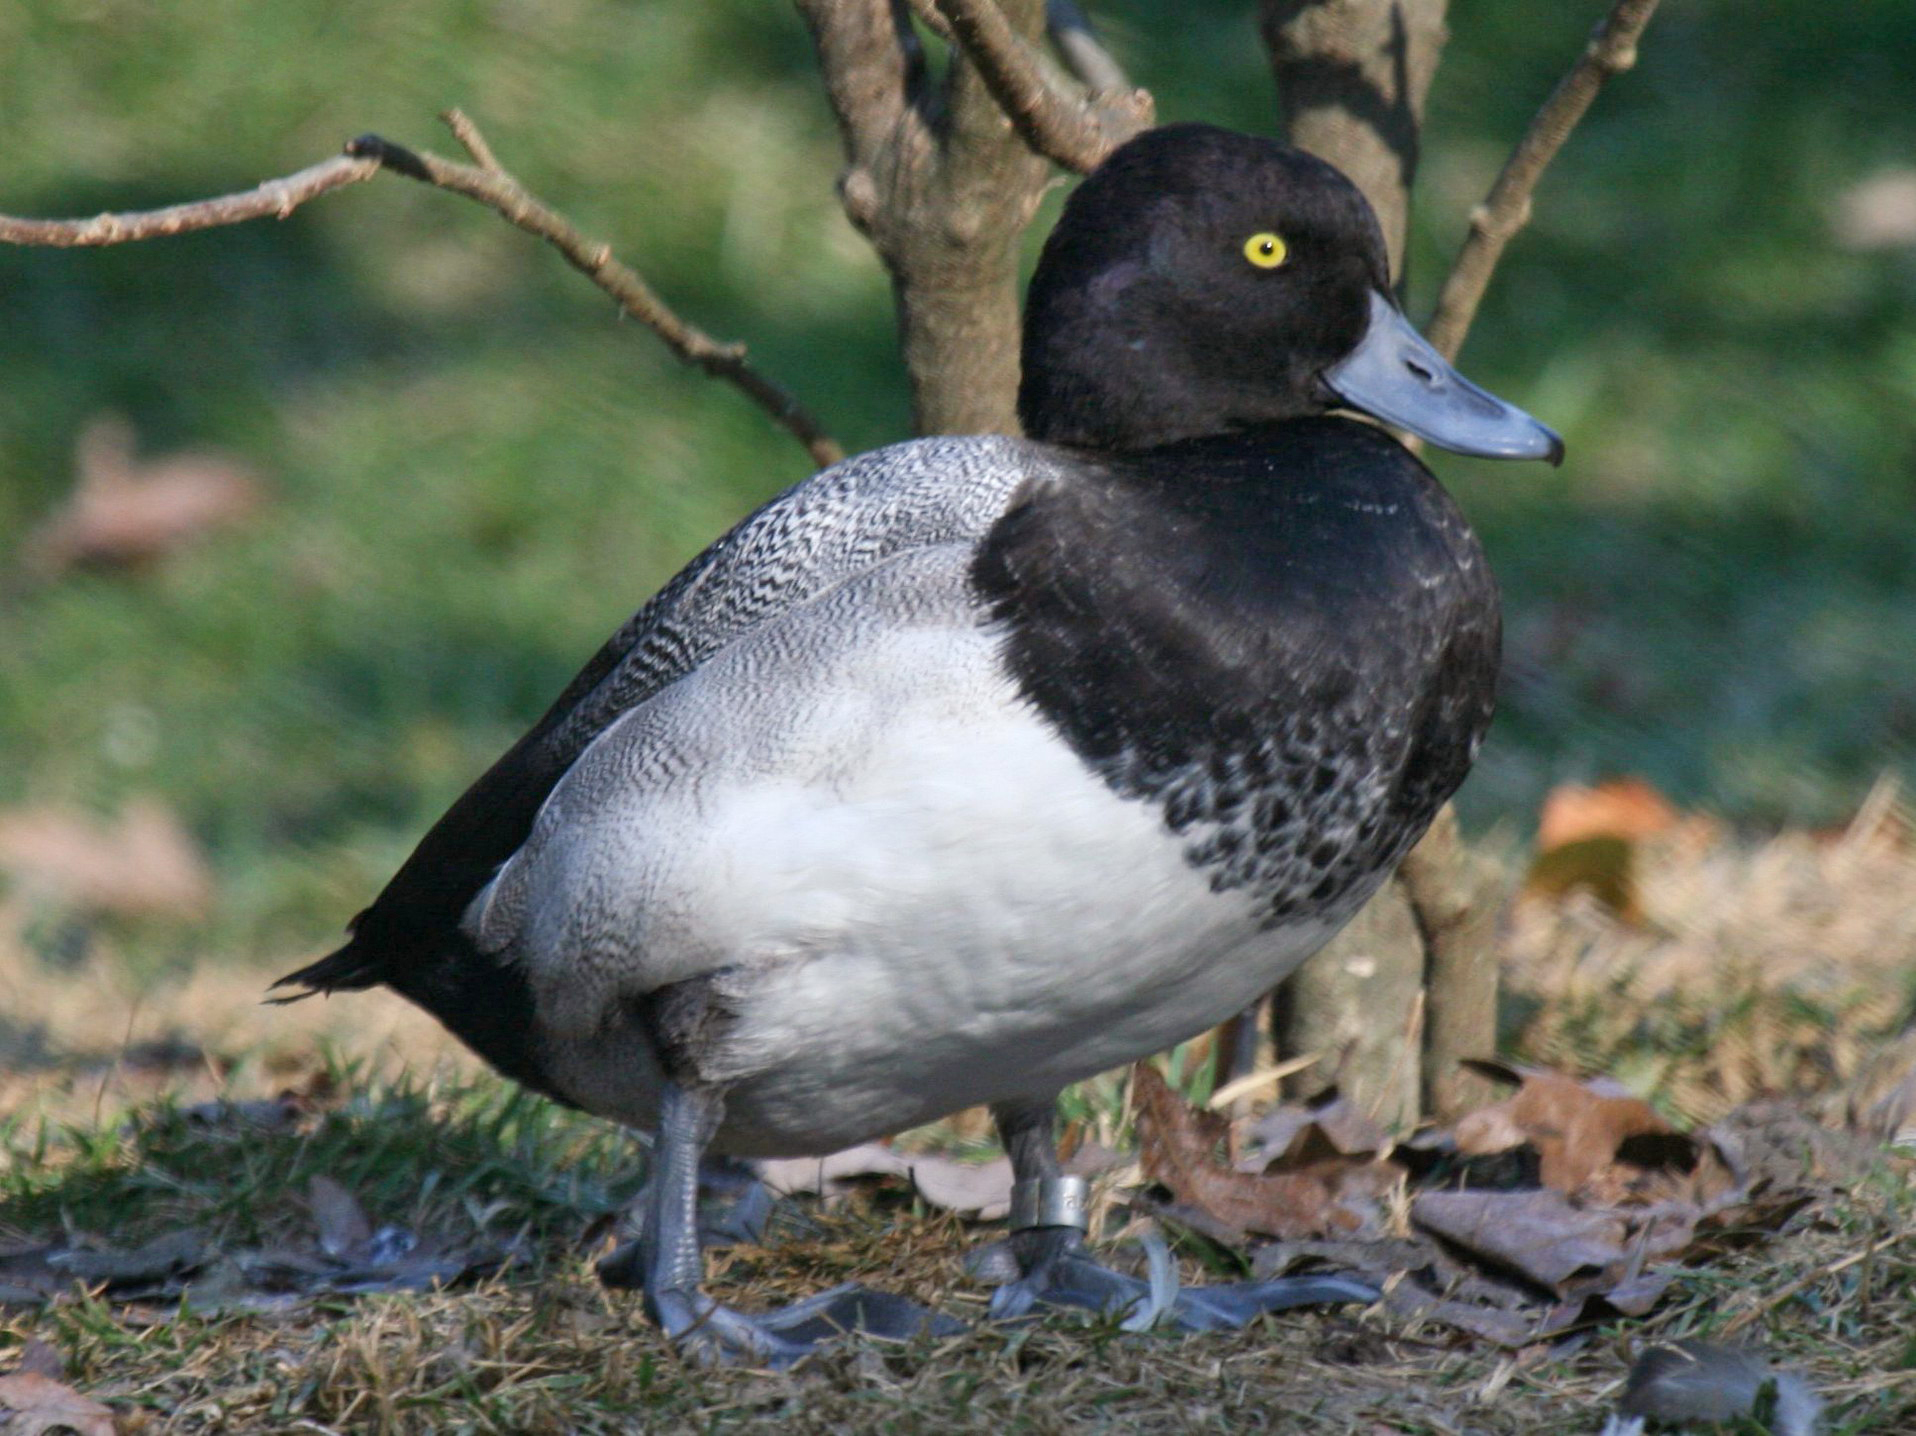 PICTURED: Lesser Scaup (Aythya affinis) at Sylvan Heights Waterfowl Park in Scotland Neck, North Carolina. Lesser Scaup are one of the species to benefit most from these new conservation projects. Photo credit Dick Daniels, CC 3.0.